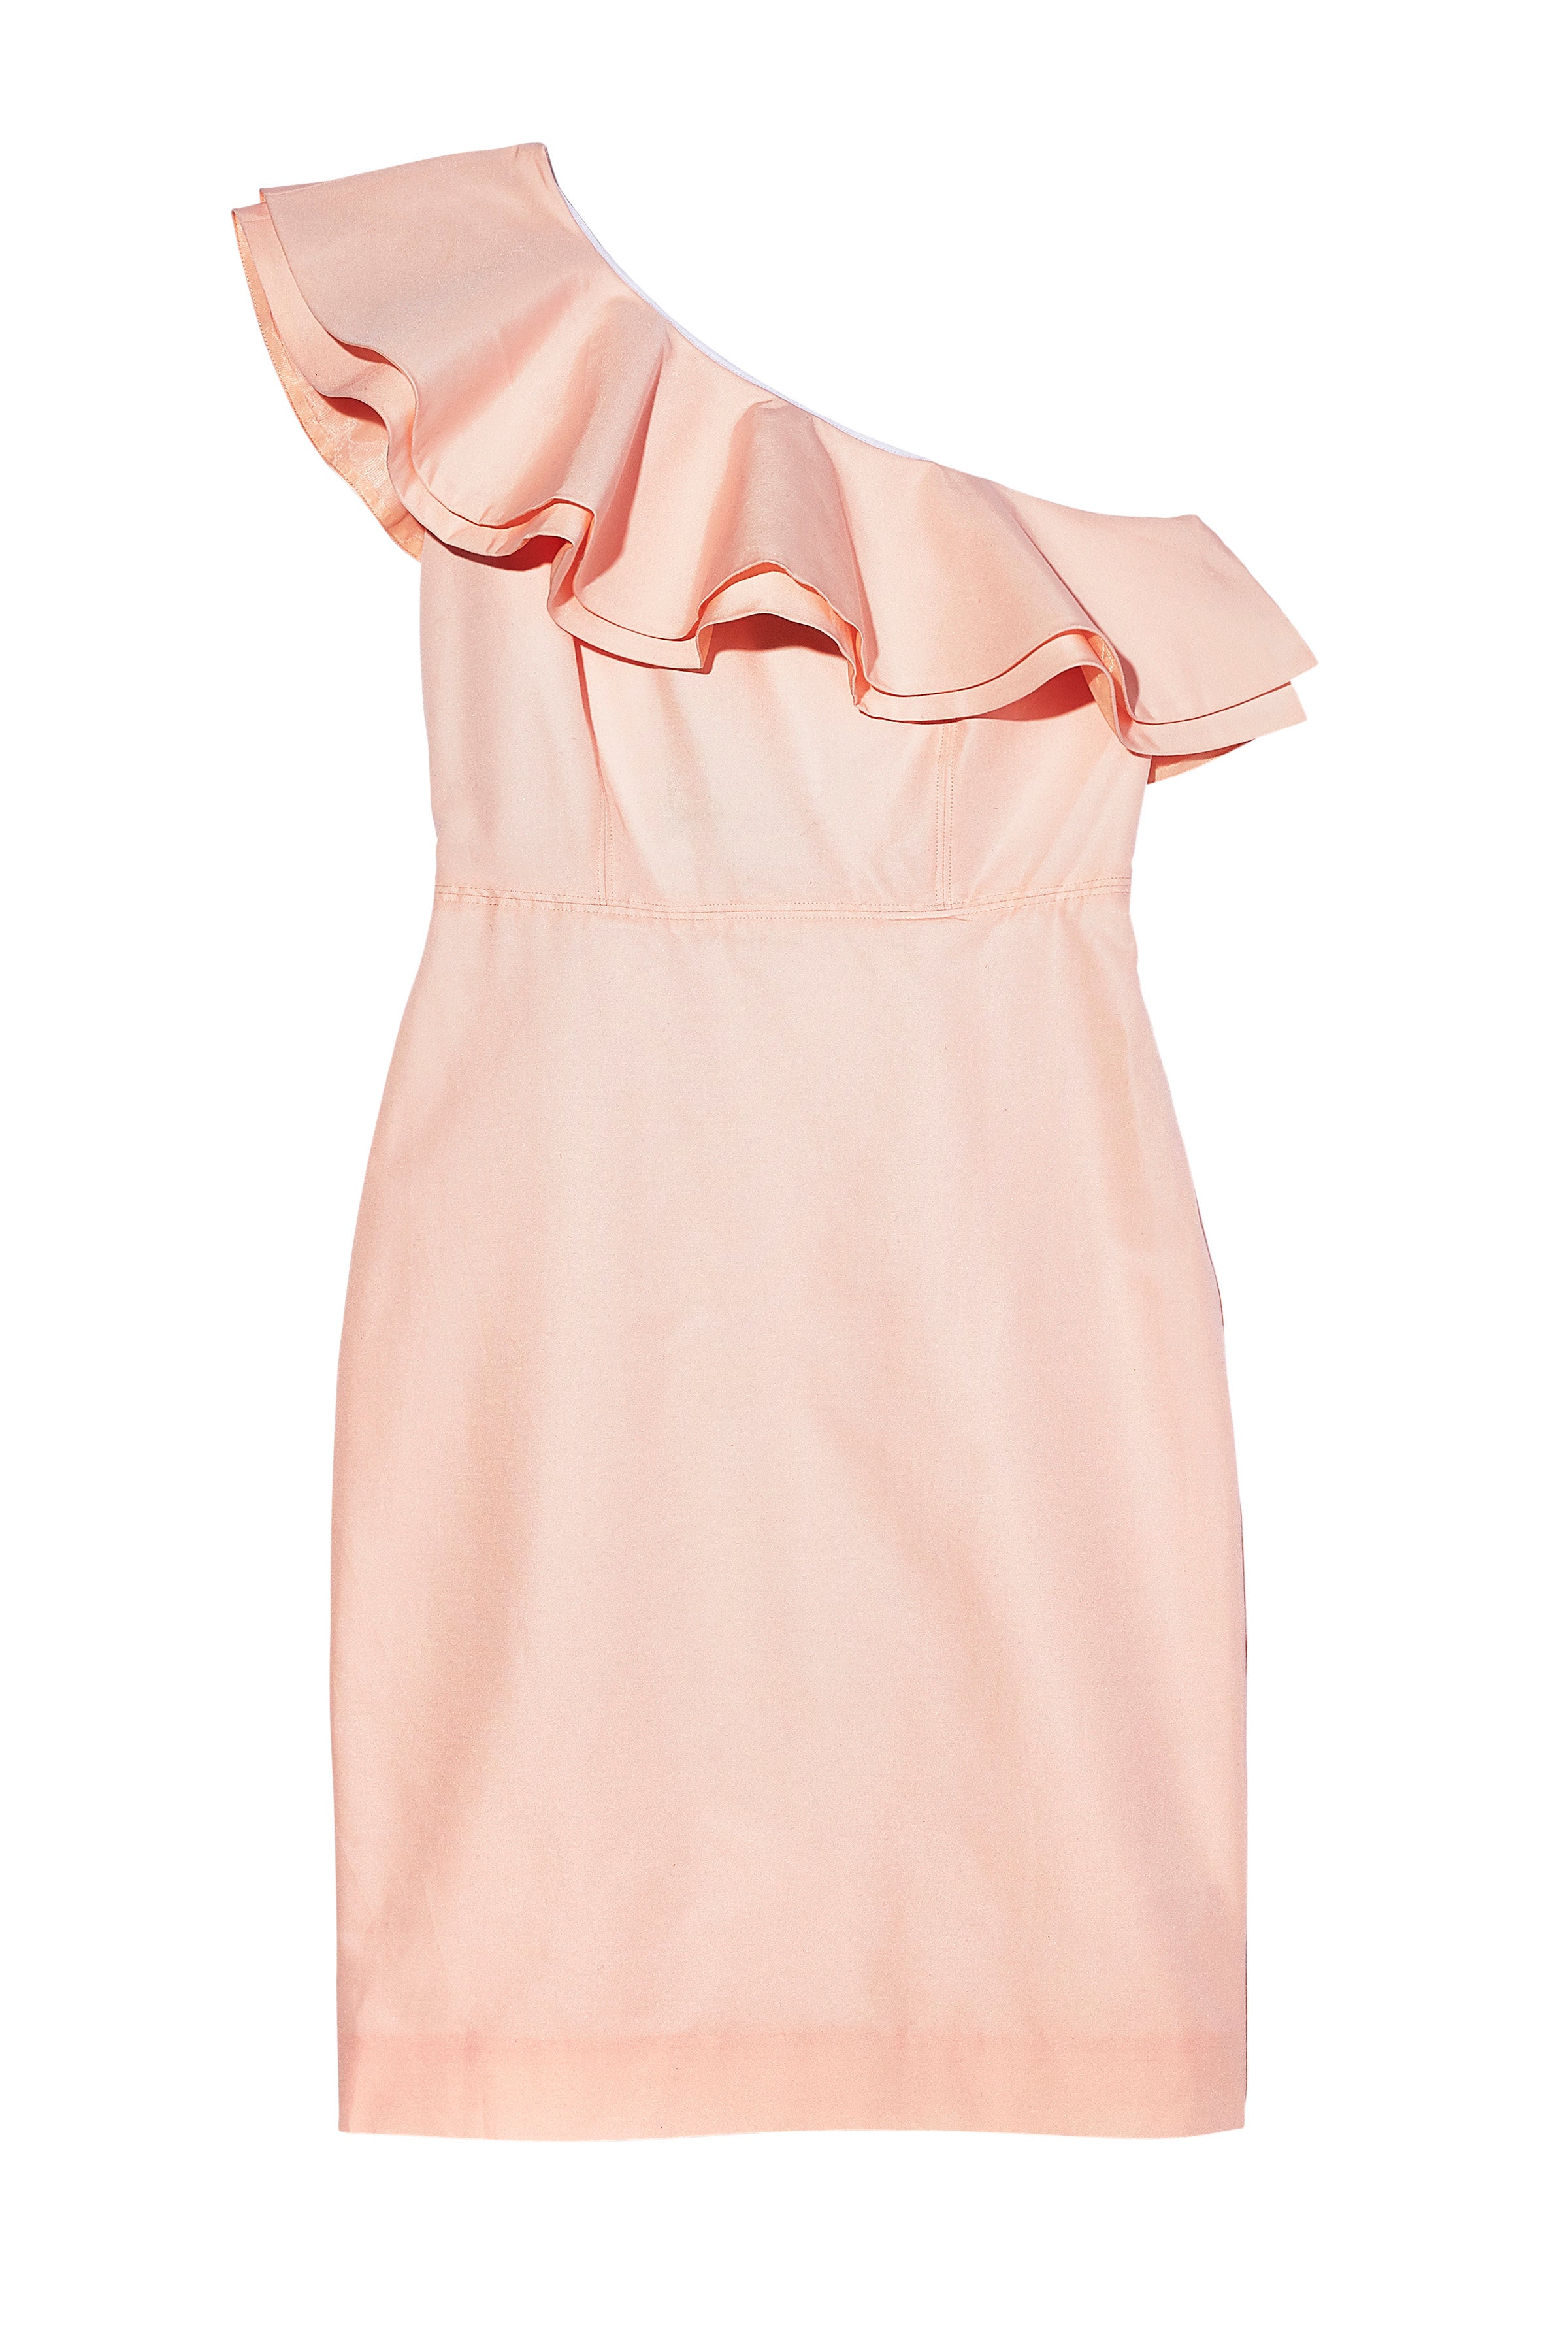 The Prettiest Blush Pink Items to Add to Your Closet For Spring